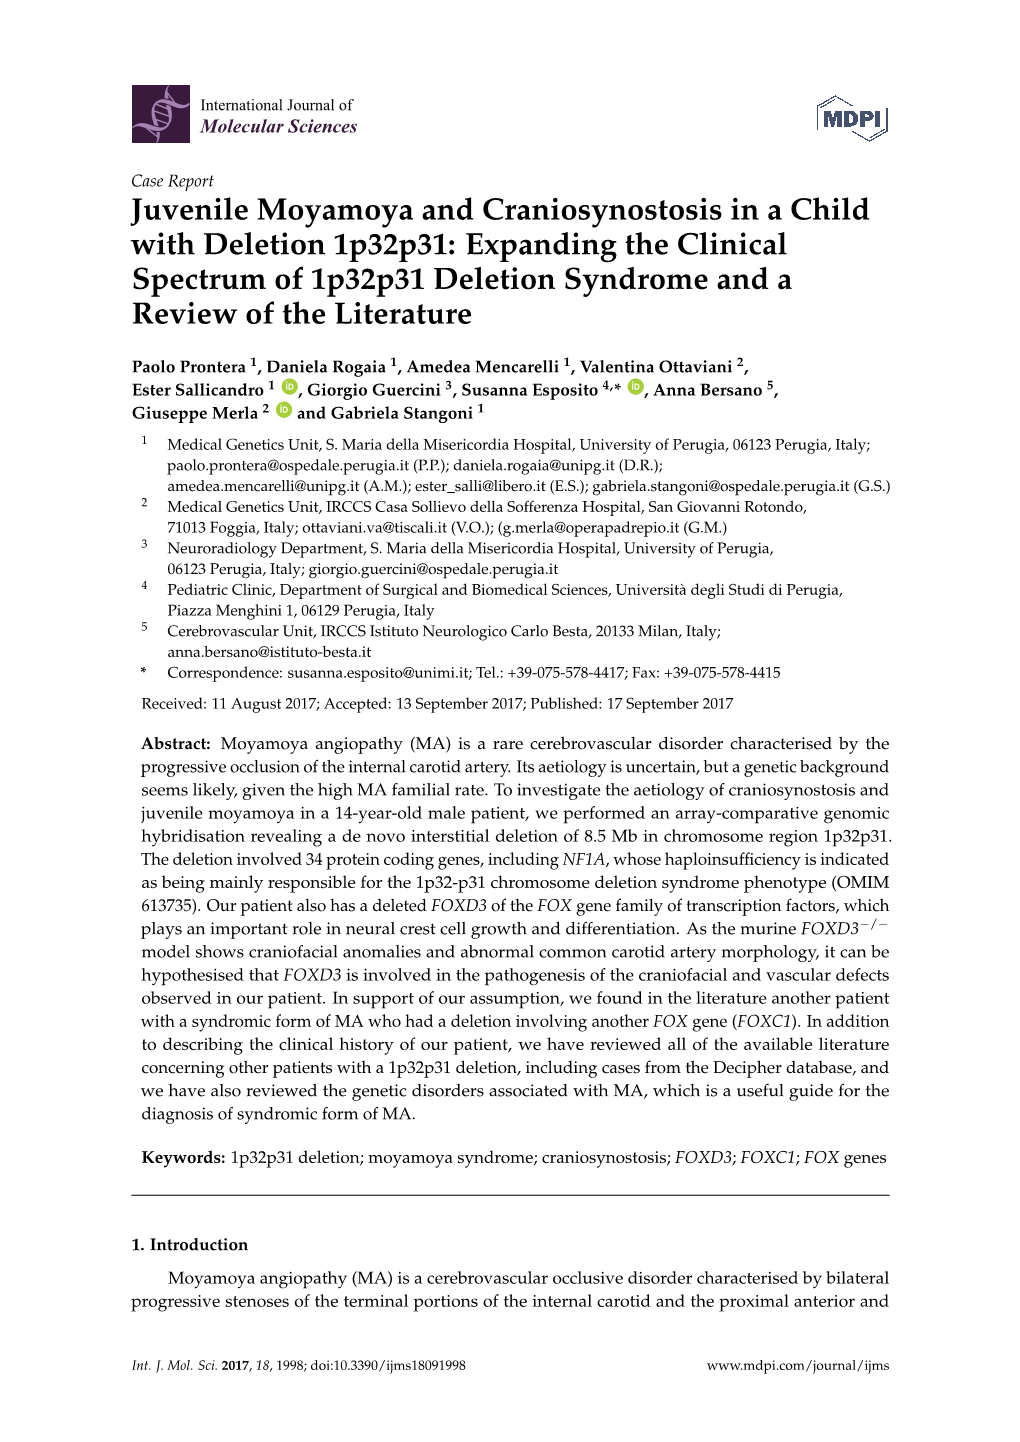 Juvenile Moyamoya and Craniosynostosis in a Child with Deletion 1P32p31: Expanding the Clinical Spectrum of 1P32p31 Deletion Syndrome and a Review of the Literature